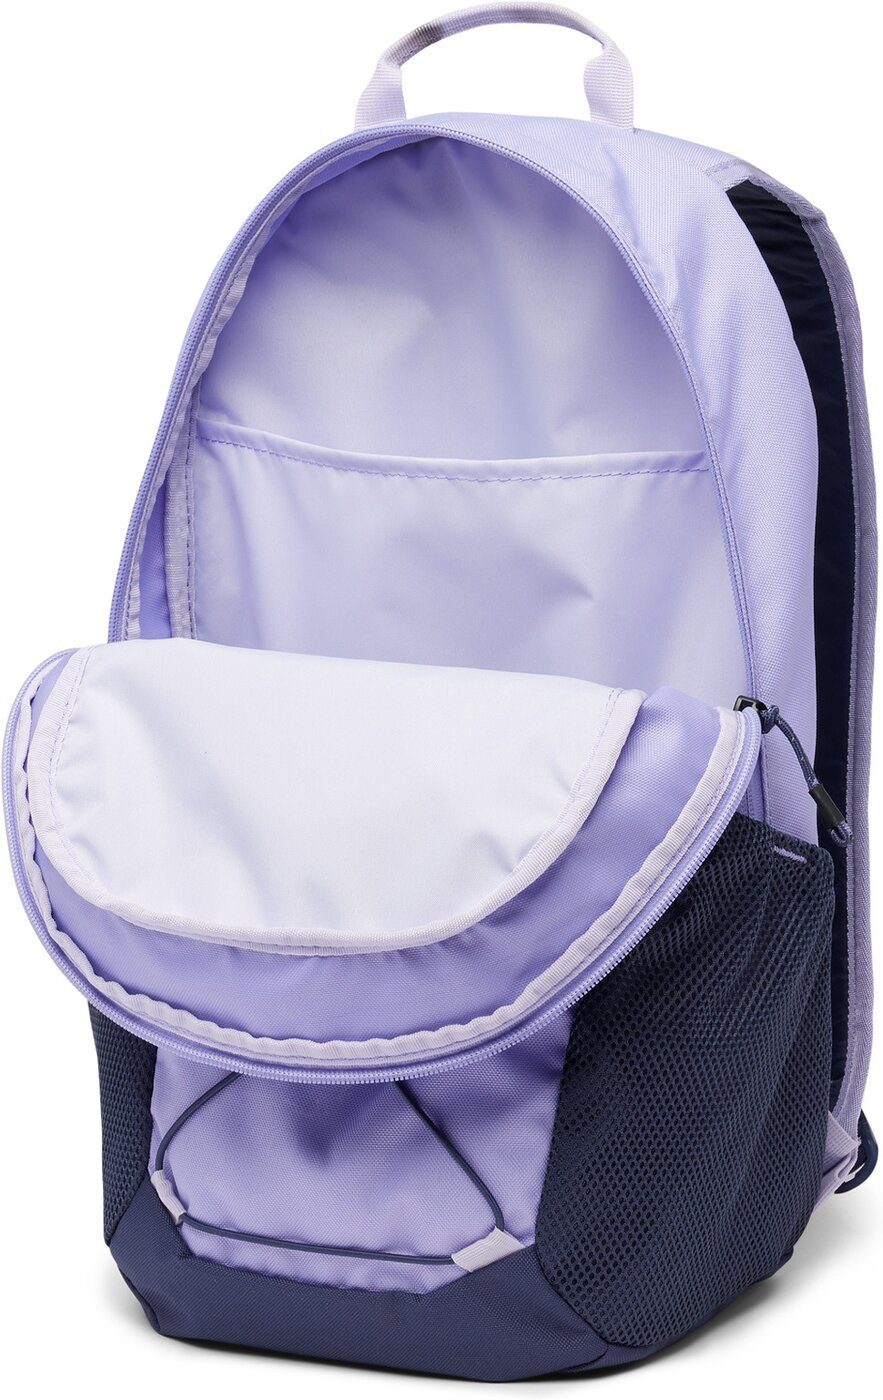 Nocturnal Backpack Purple, Atlas Columbia Rucksack 16L Frosted Explorer